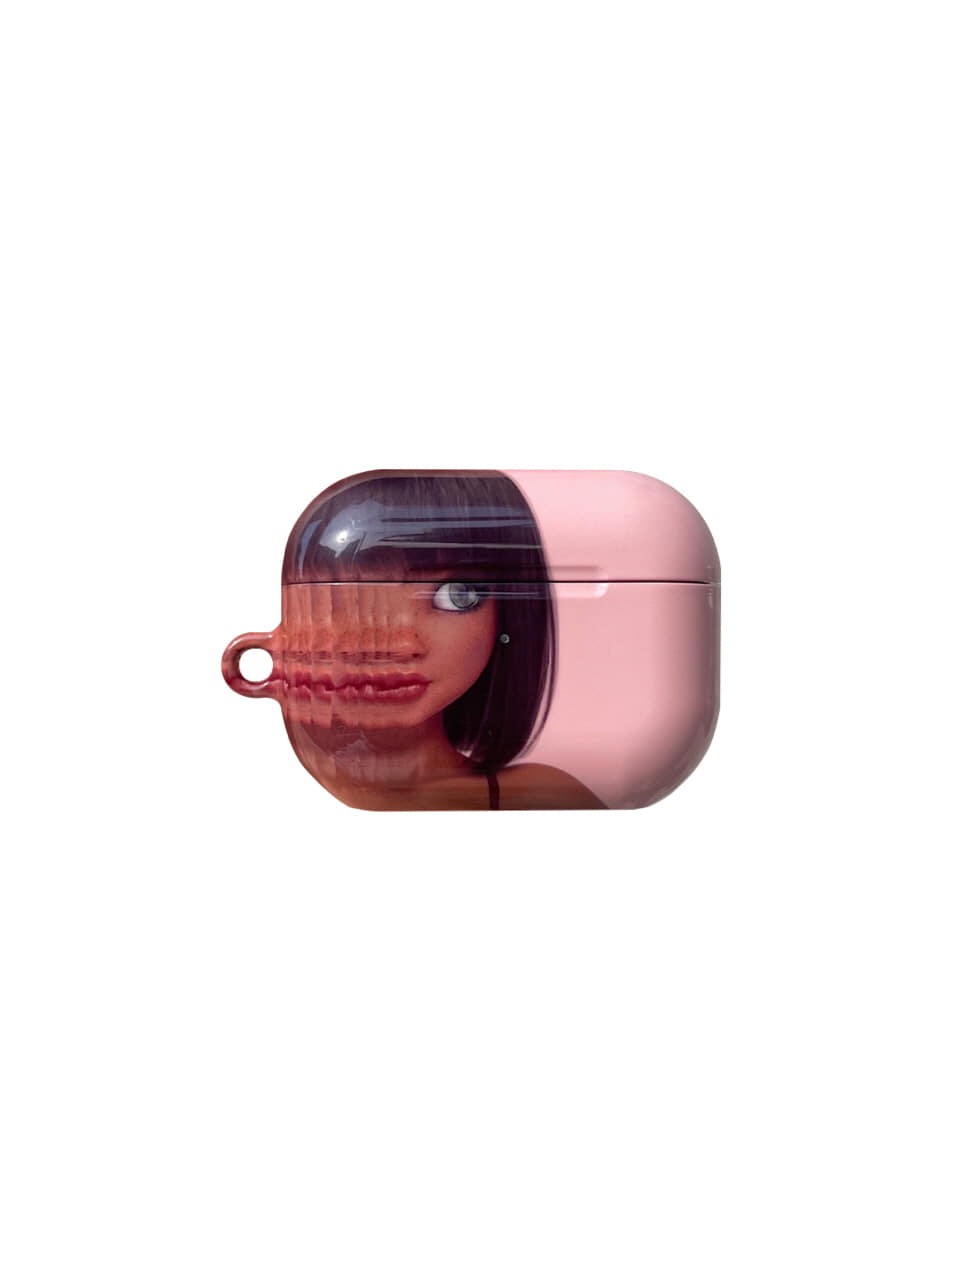 FRECKLE GIRL AIRPODS CASE